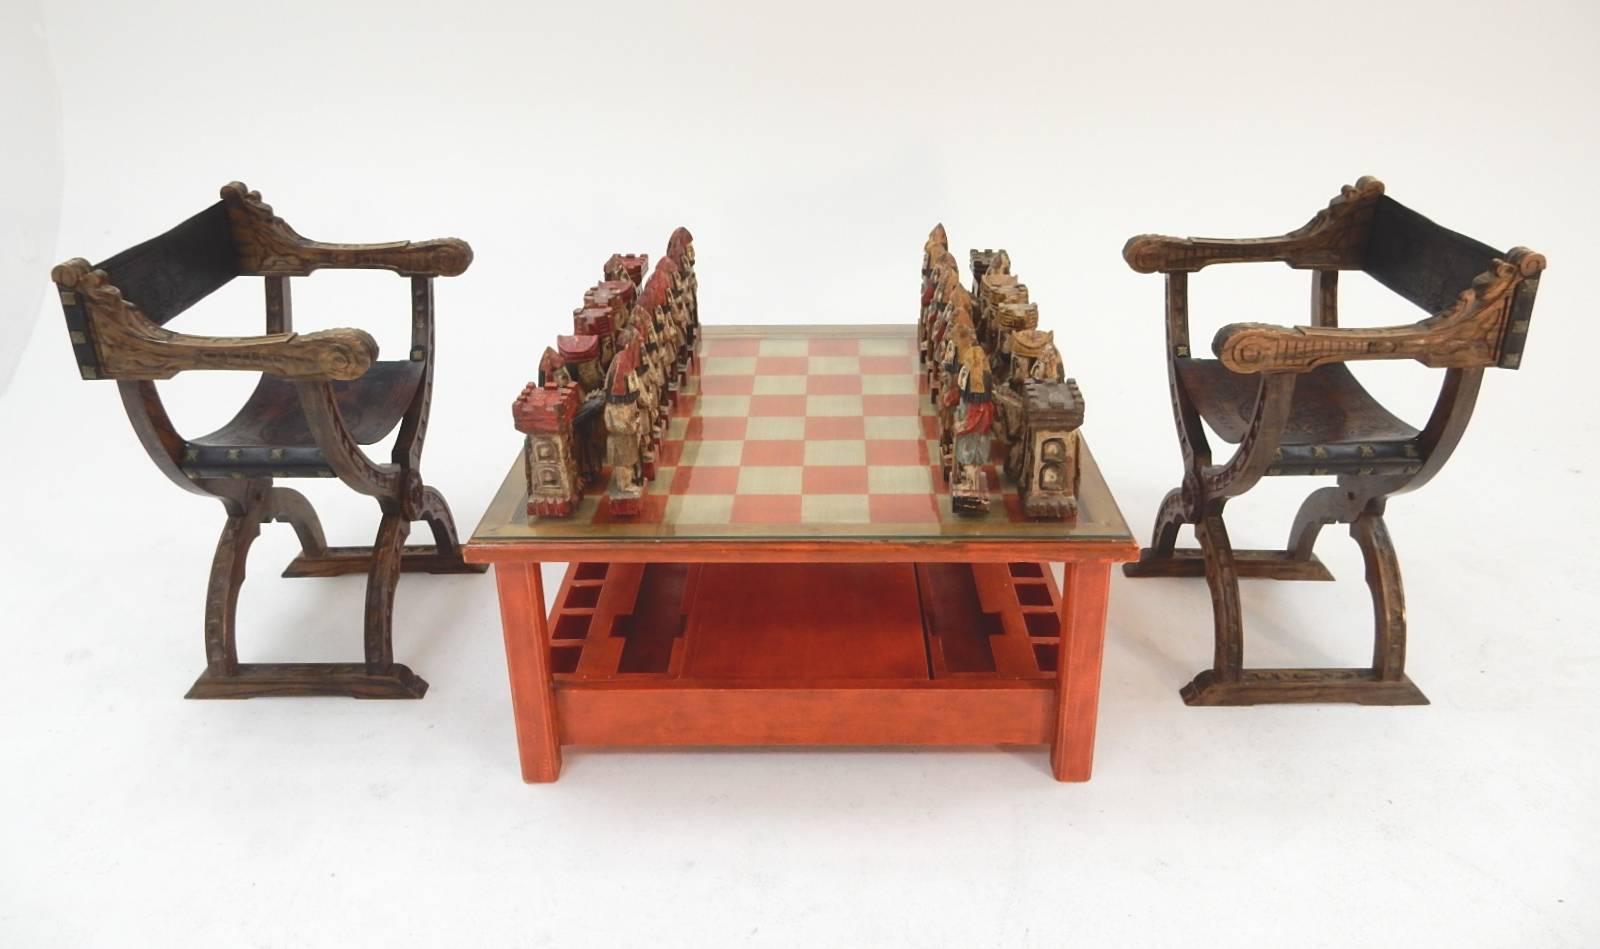 Spectacular Italian sculpted painted chess set and game table. Pieces are carved of hardwood with polychrome features. Each chess piece is a work of art.
Pieces stand 8-11 inch tall. They fit neatly into slotted pull-out drawers on each side. Table